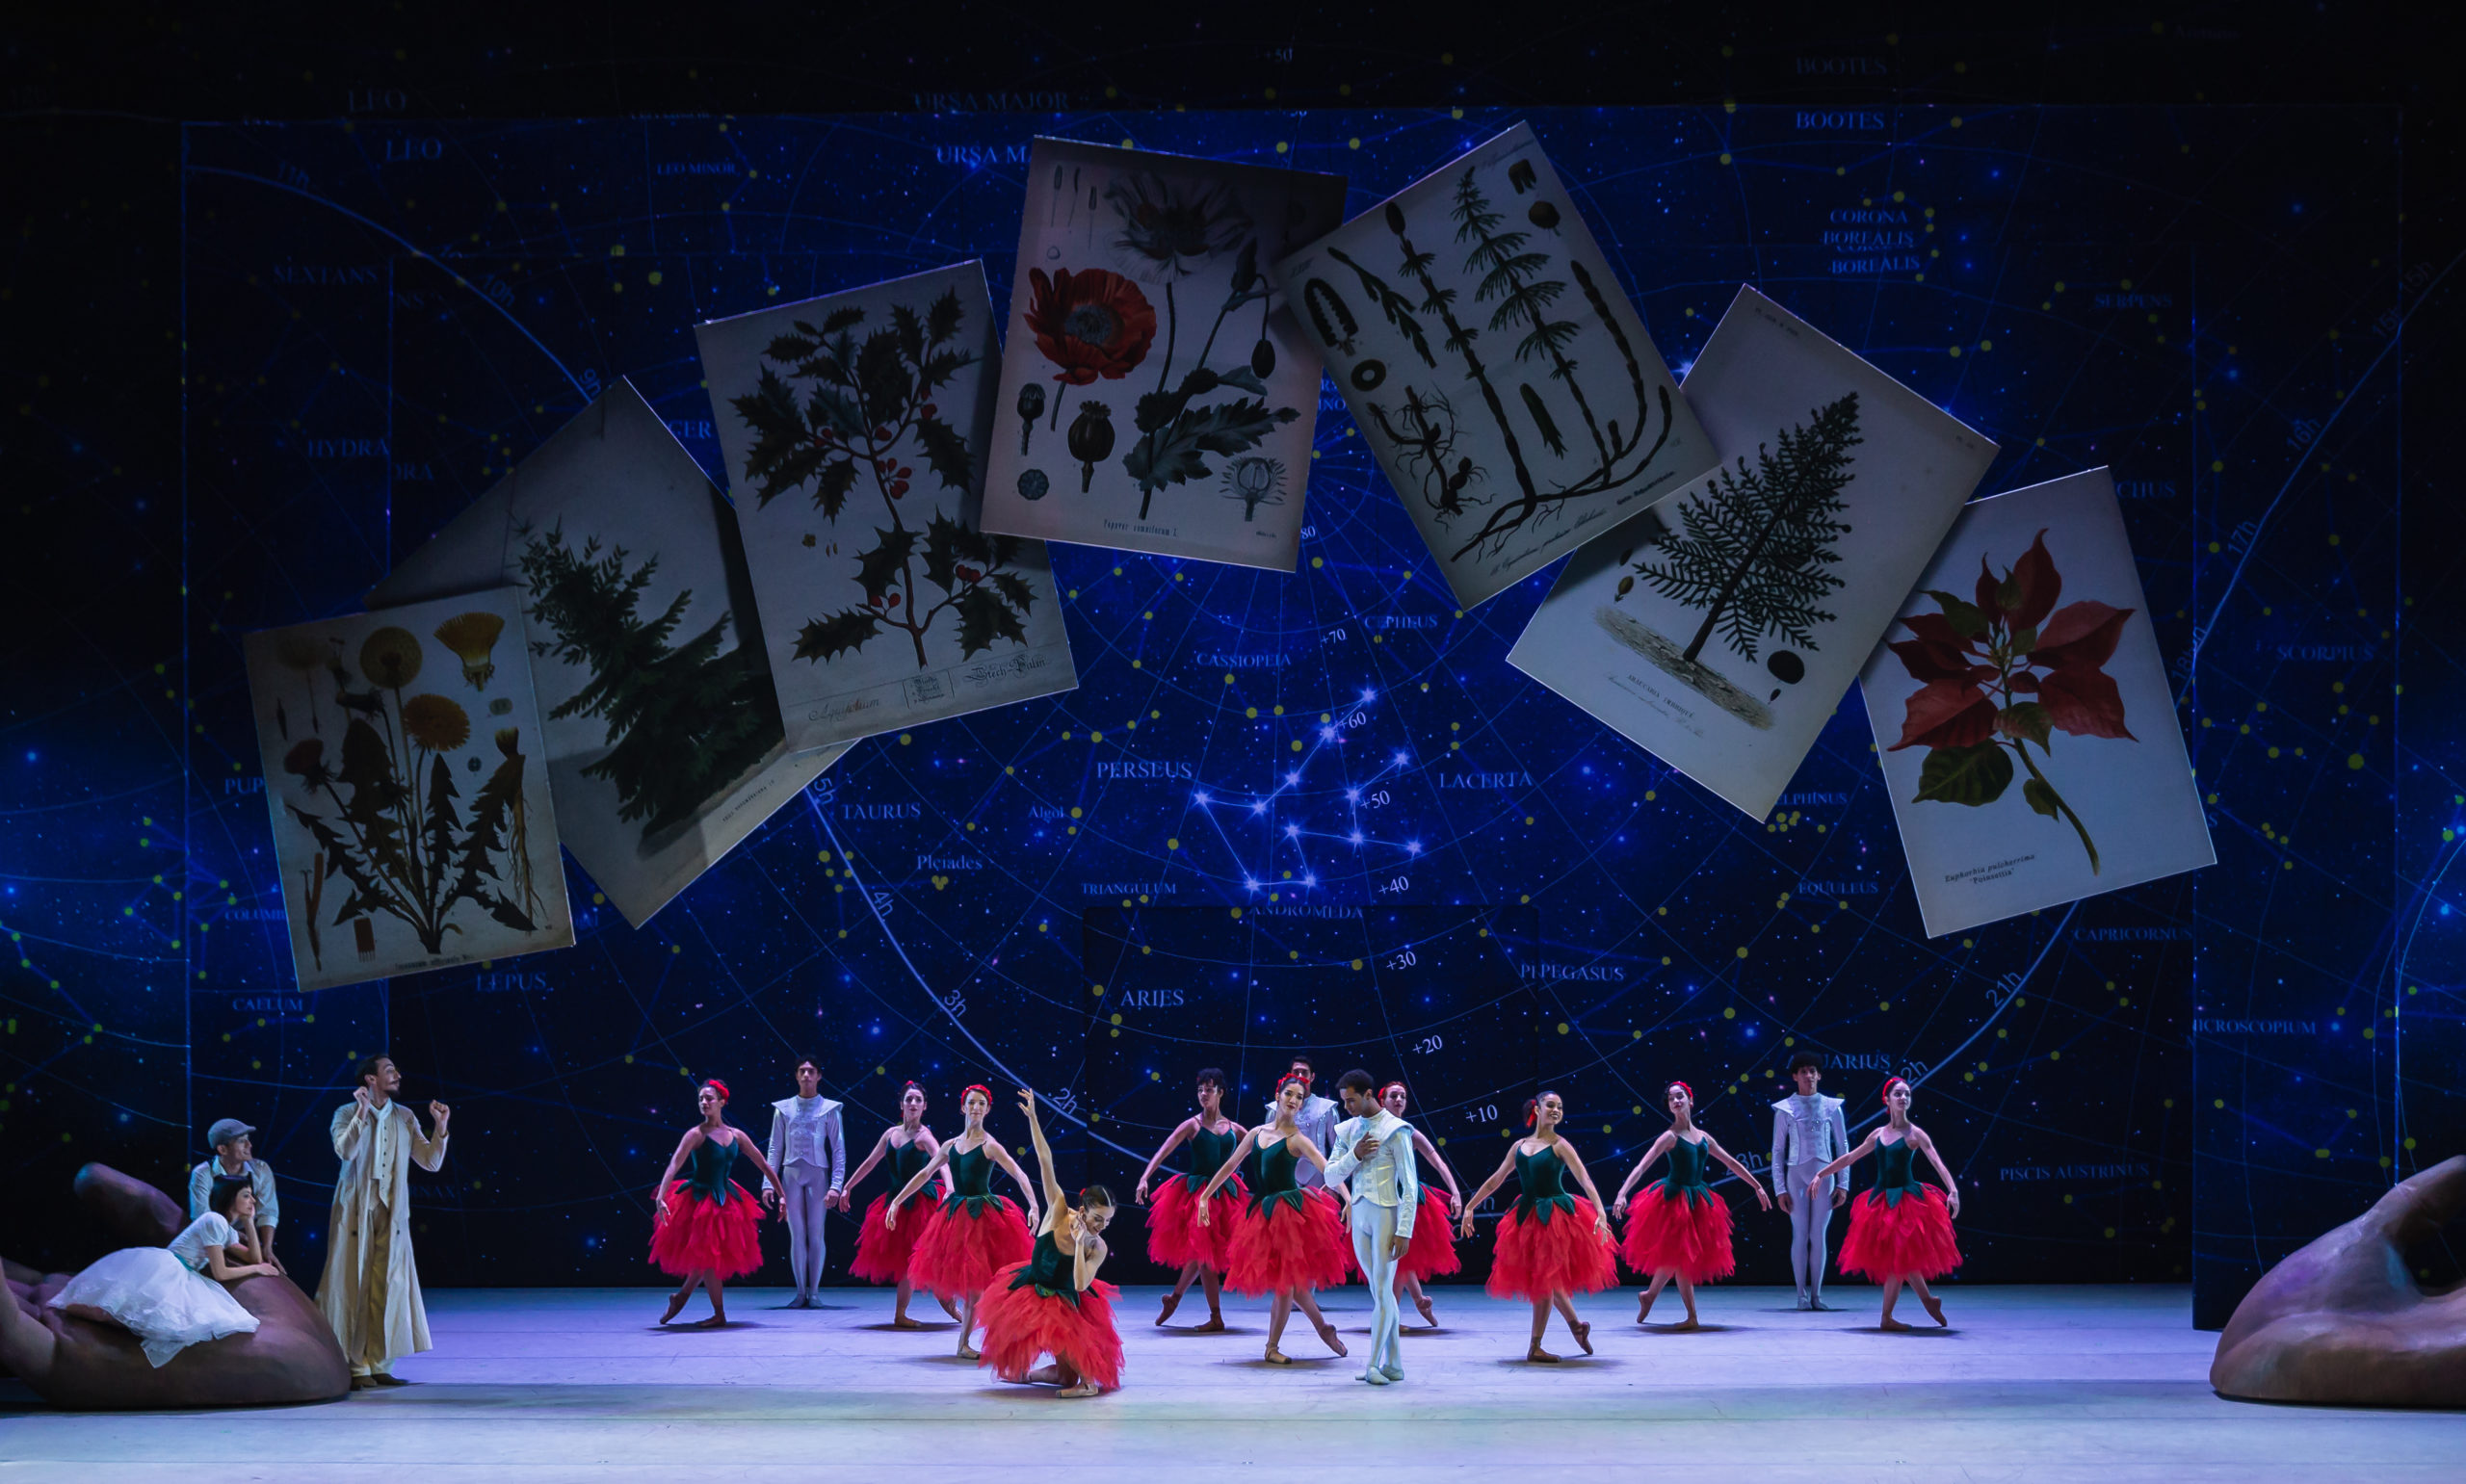 Onstage, a group of dancers dressed in rose-themes romantic tutus, princely costumes and white dresses adorn a stunningly decorated scene. The dancers pose in B plus or rest in various caricatured positions in front of a galaxy-themed backdrop with large prints of holiday-themed plants hanging in front.